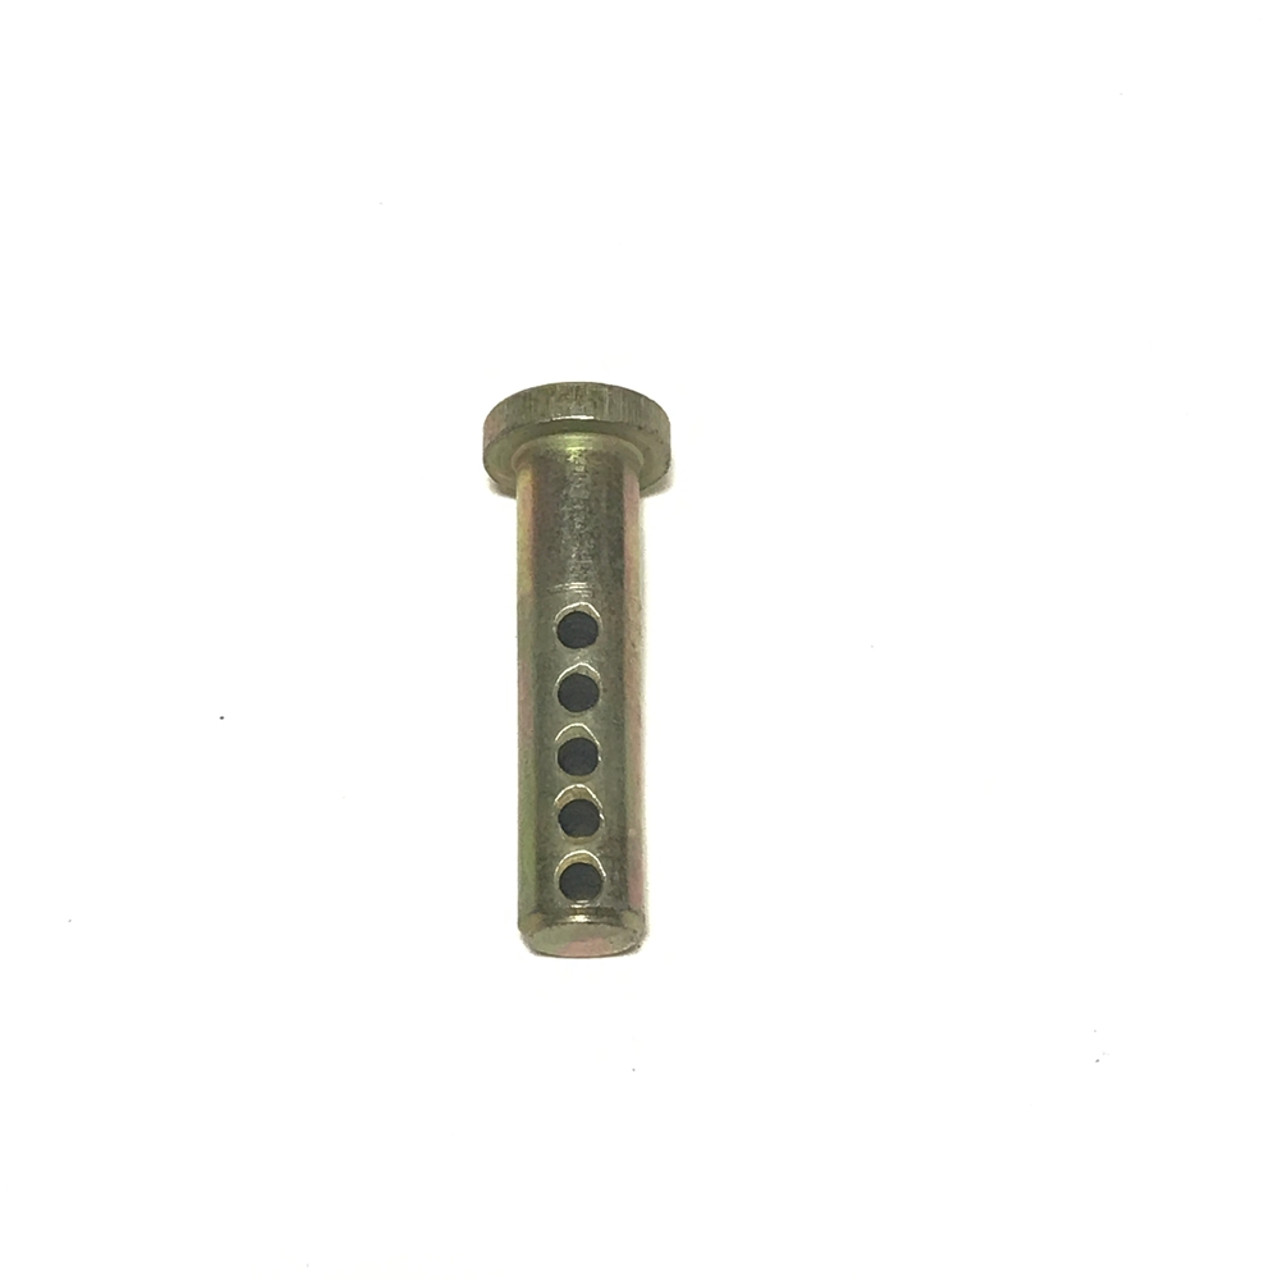 UNIVERSAL CLEVIS PIN 1/2 X 2